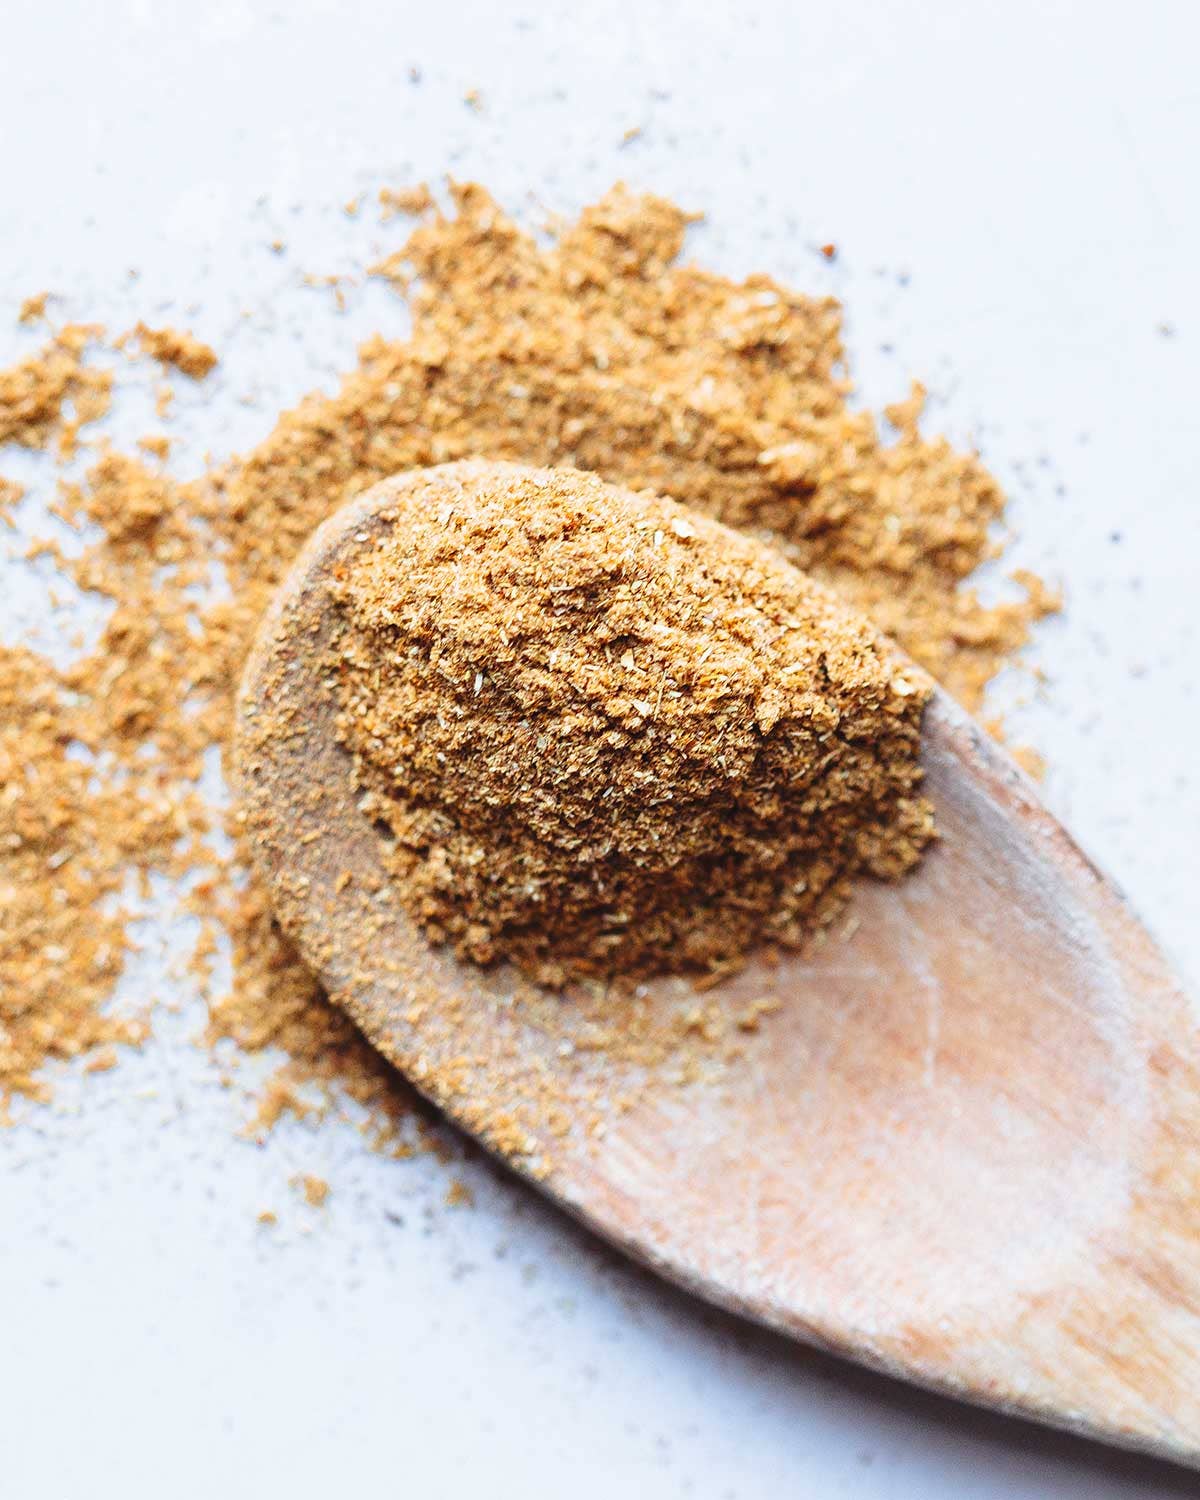 This Secret Weapon Spice Blend From Georgia is Good on Everything